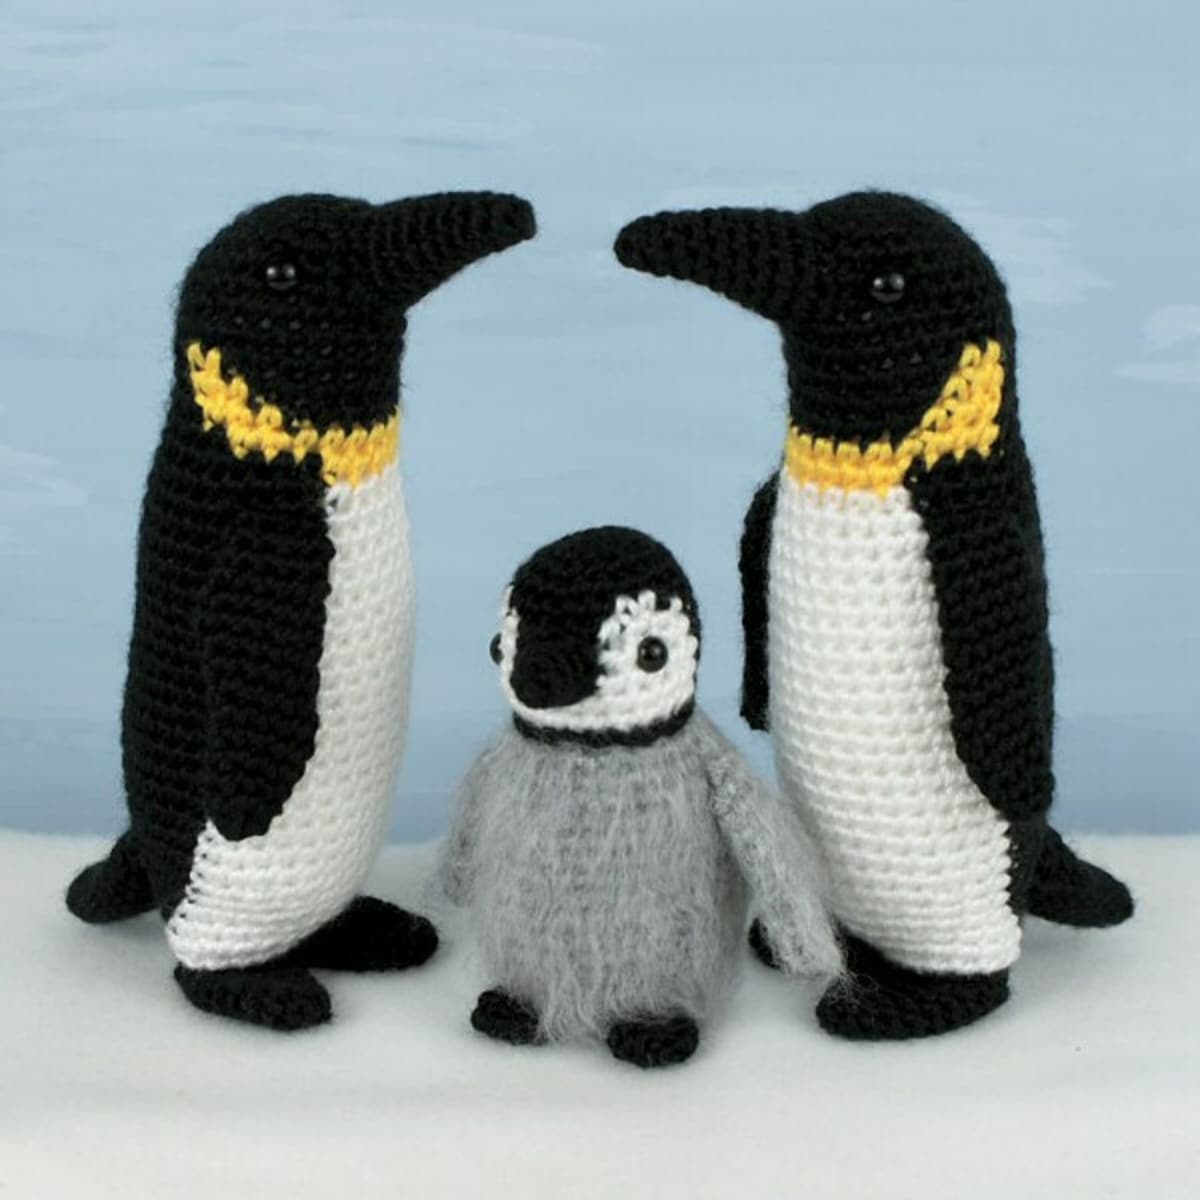 Two black and white crochet Emperor Penguins standing facing each other with a gold band around their neck and a baby penguin in the middle with a gray body.